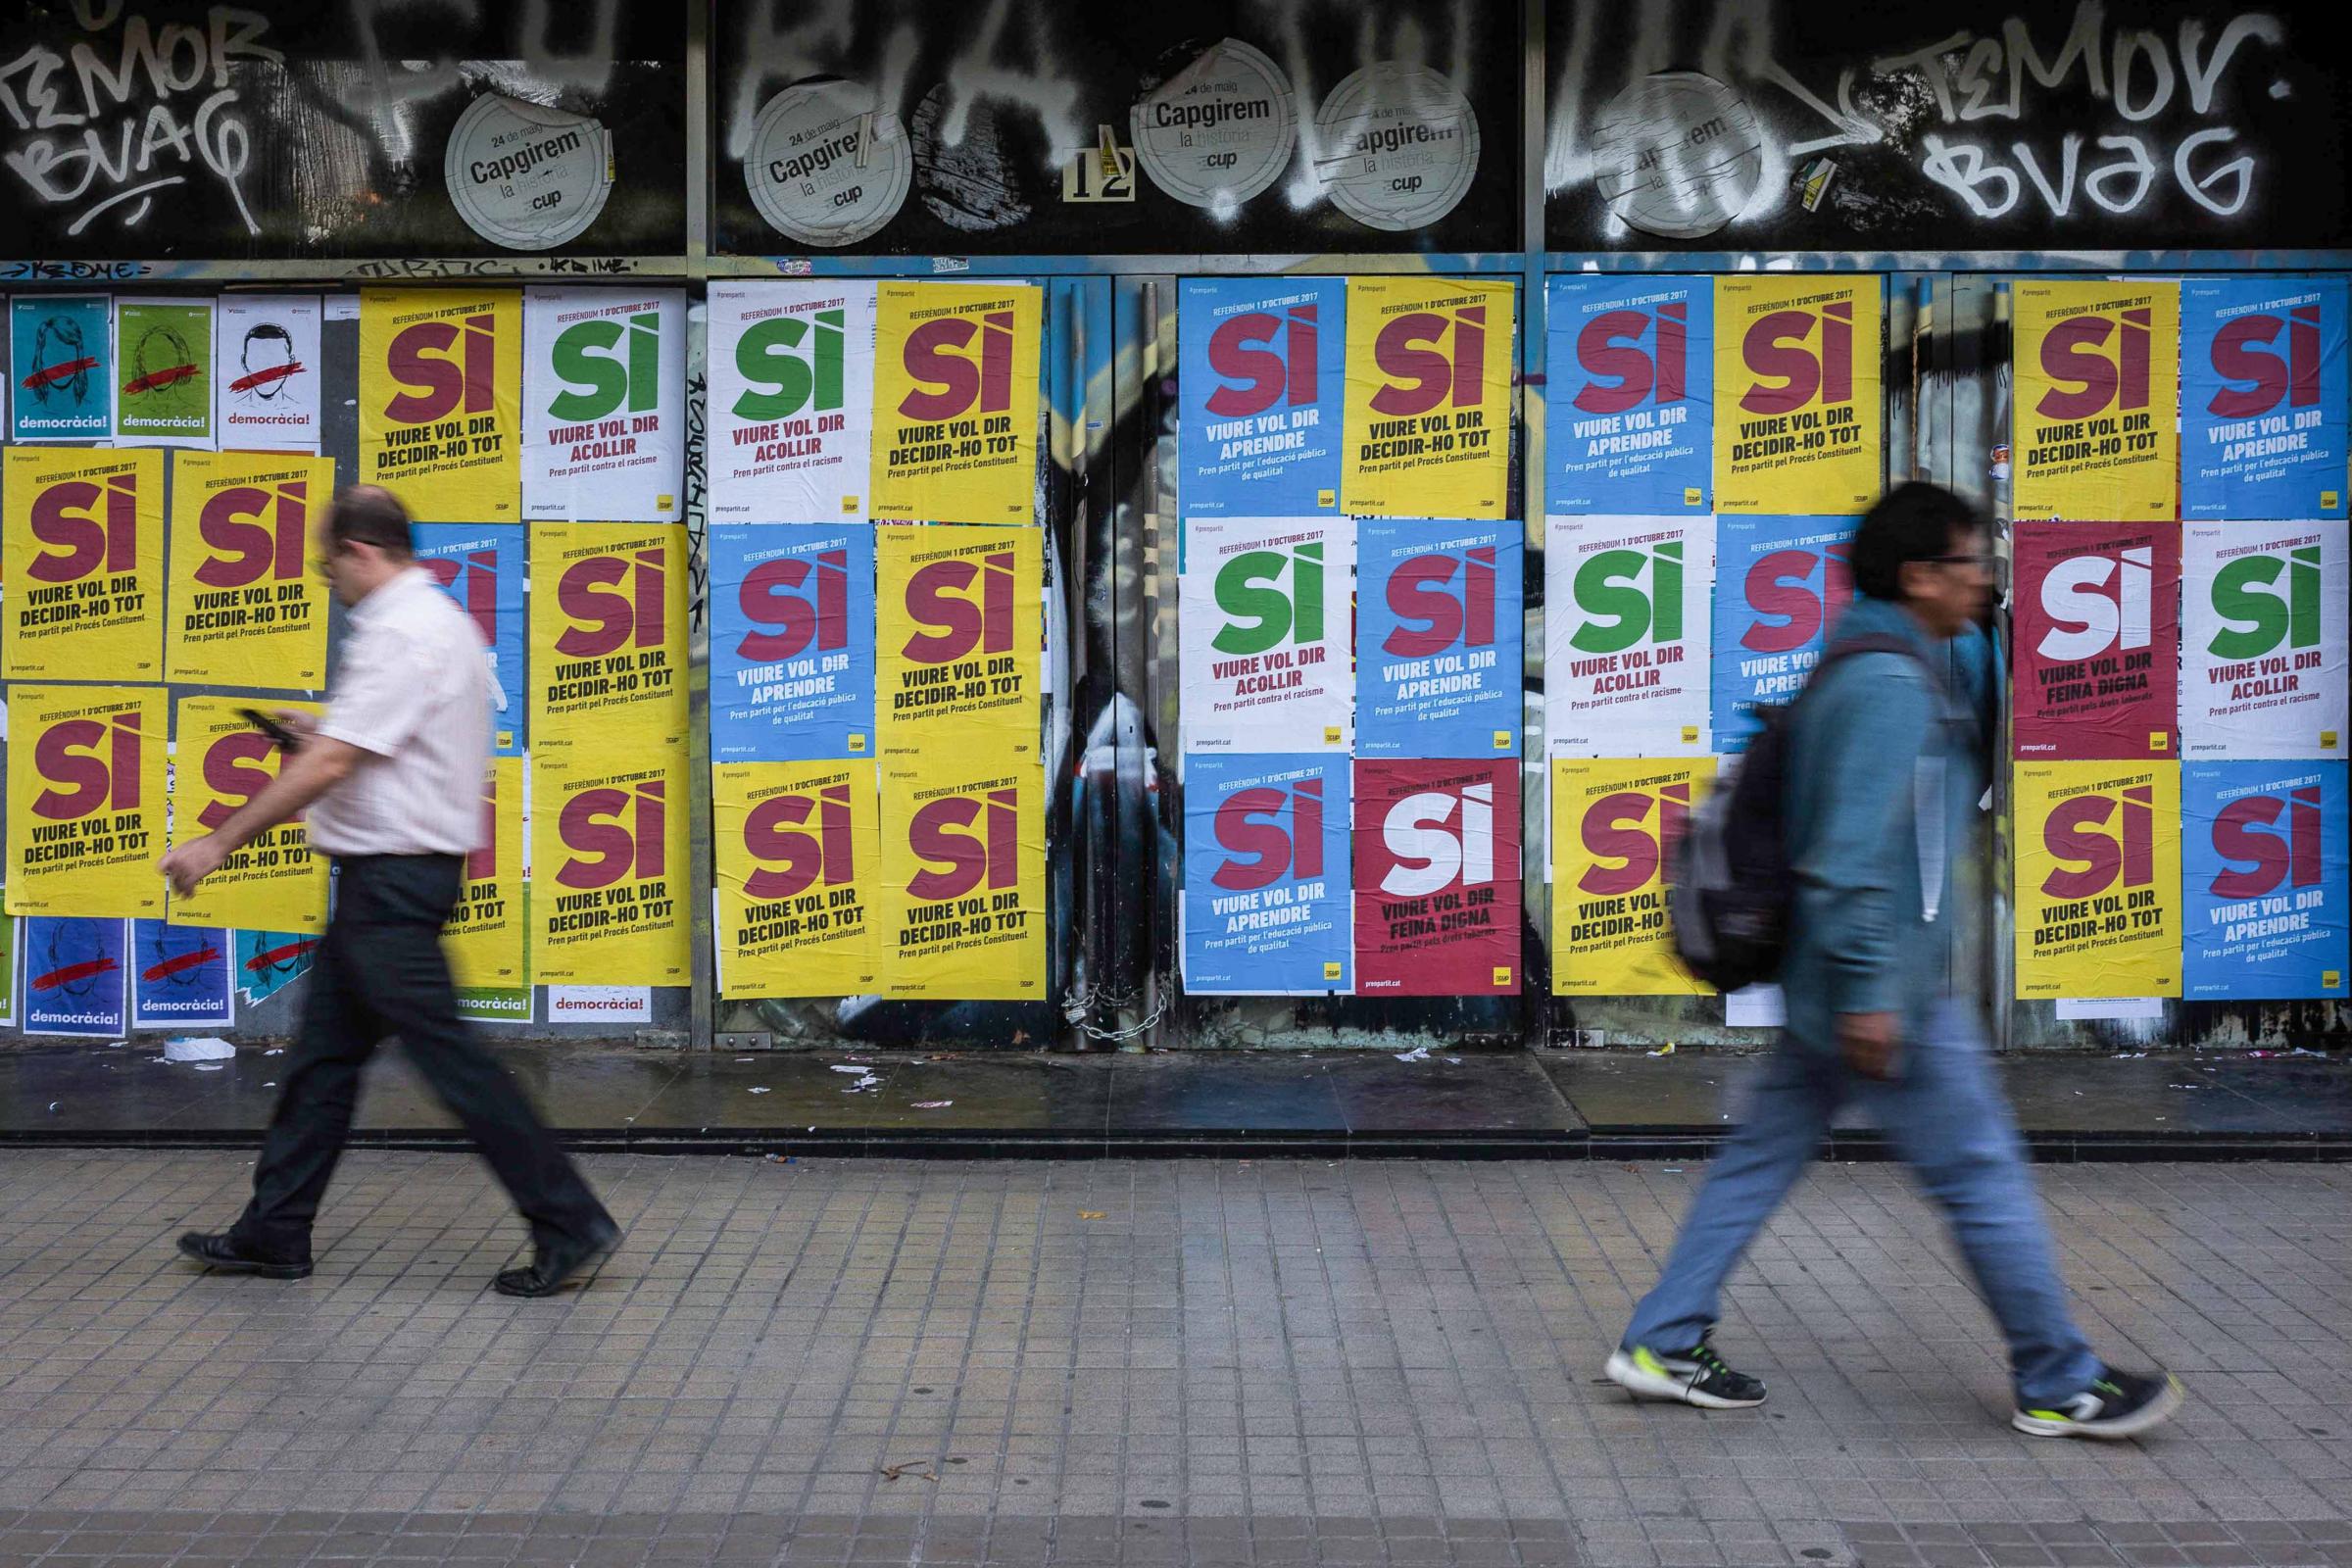 September 29th, 2017. Barcelona, Spain. Two people walk through the center of Barcelona with posters calling for a YES vote for the referendum, in...